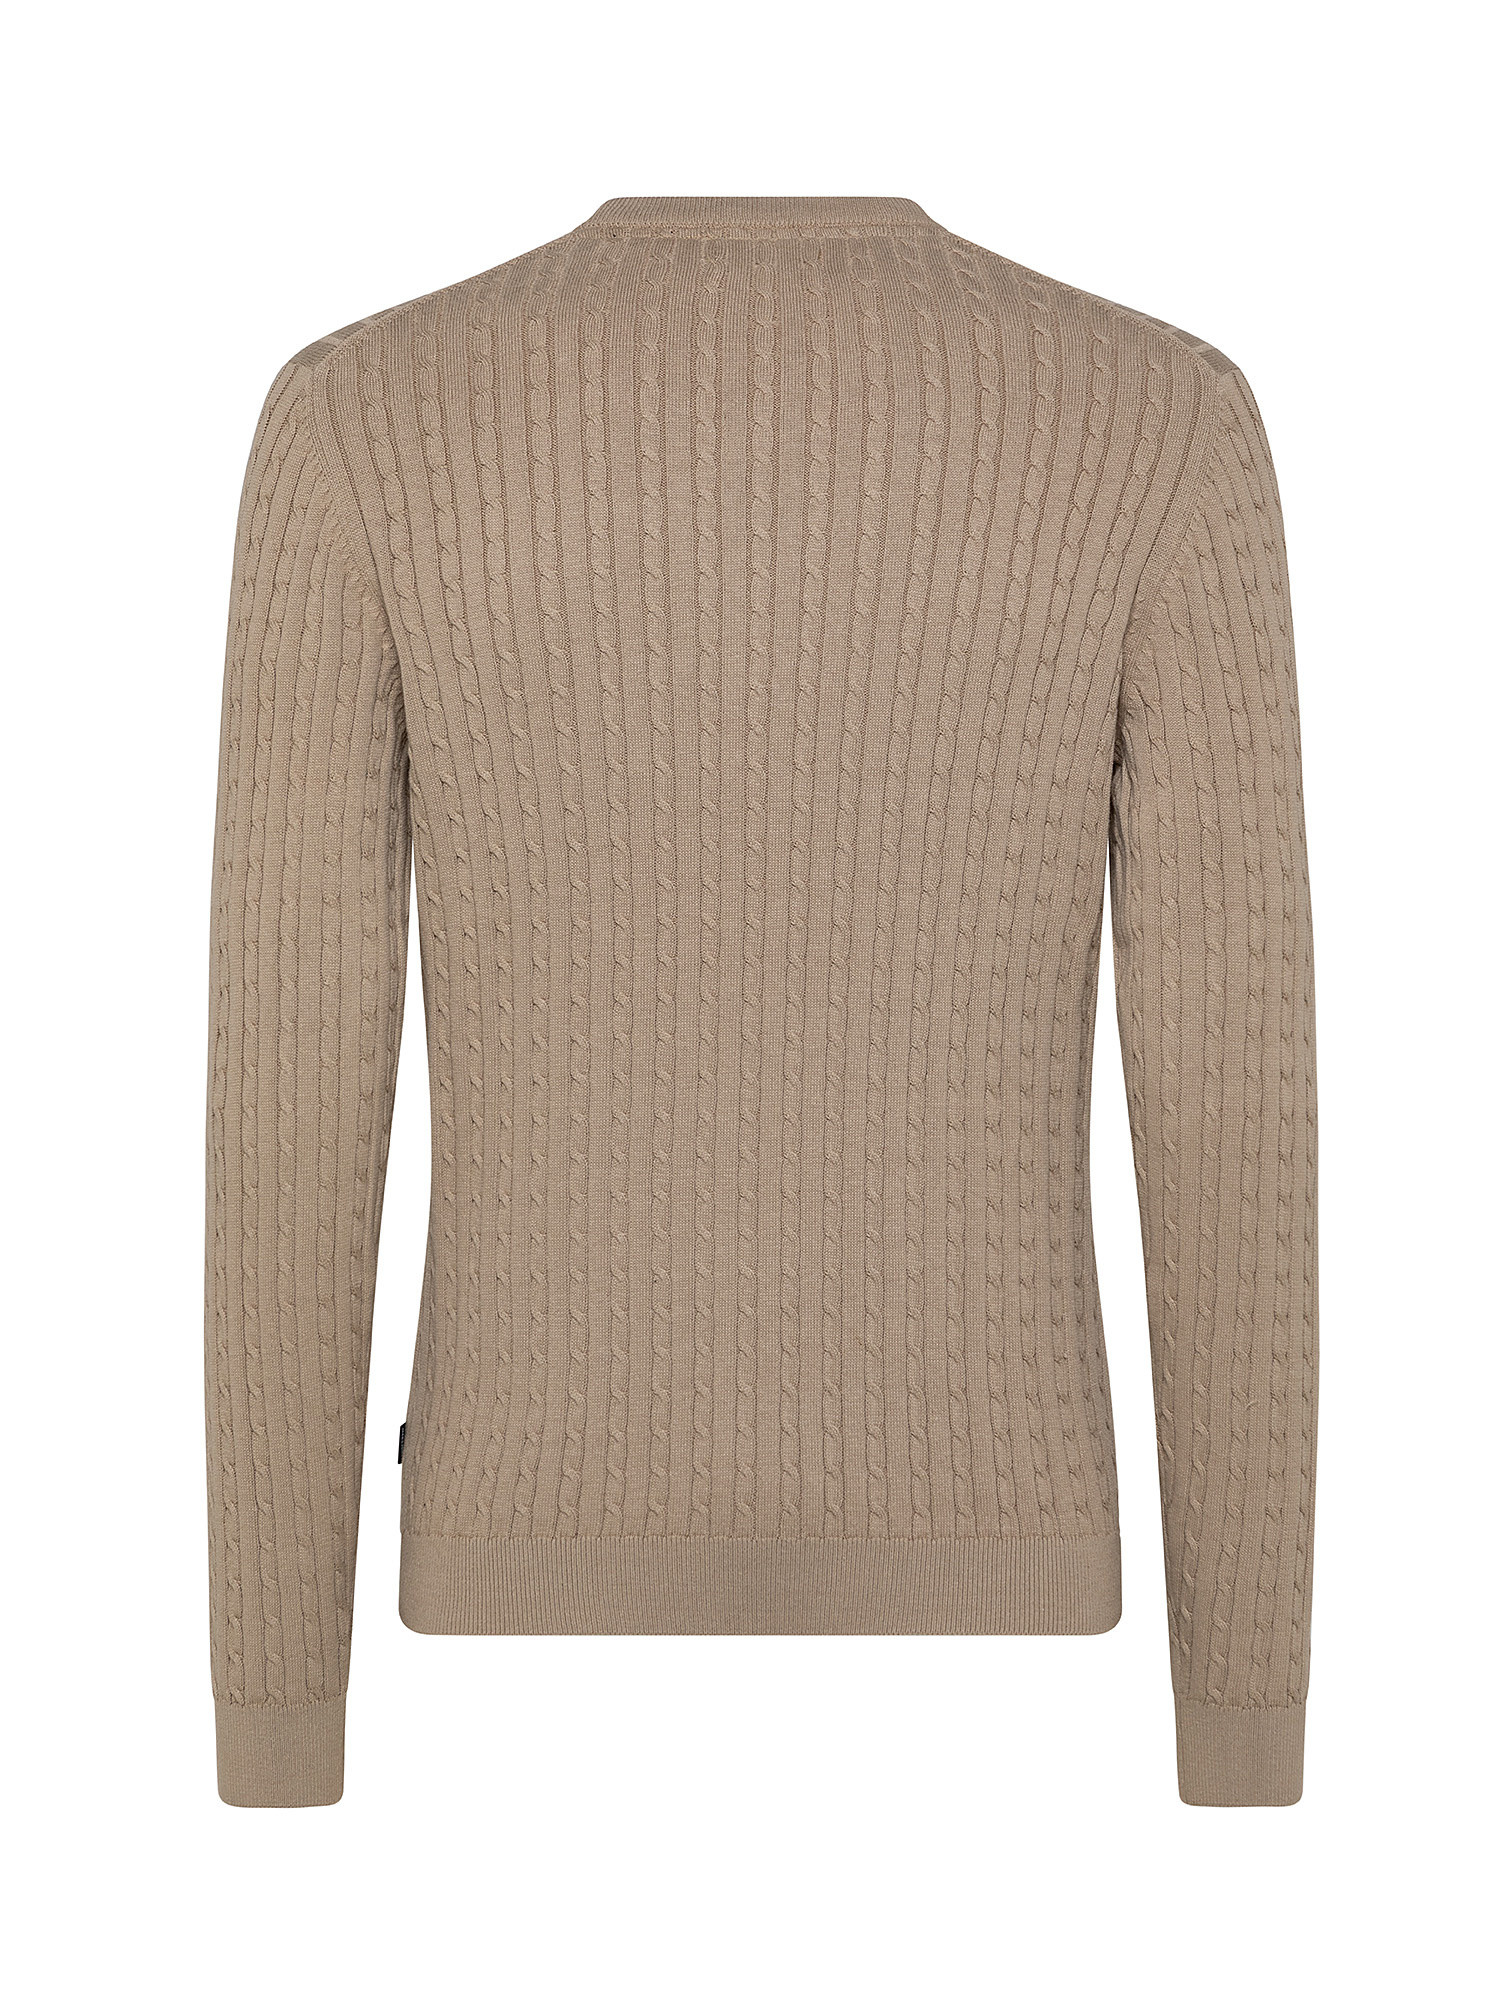 Maglione Girocollo, Beige, large image number 1